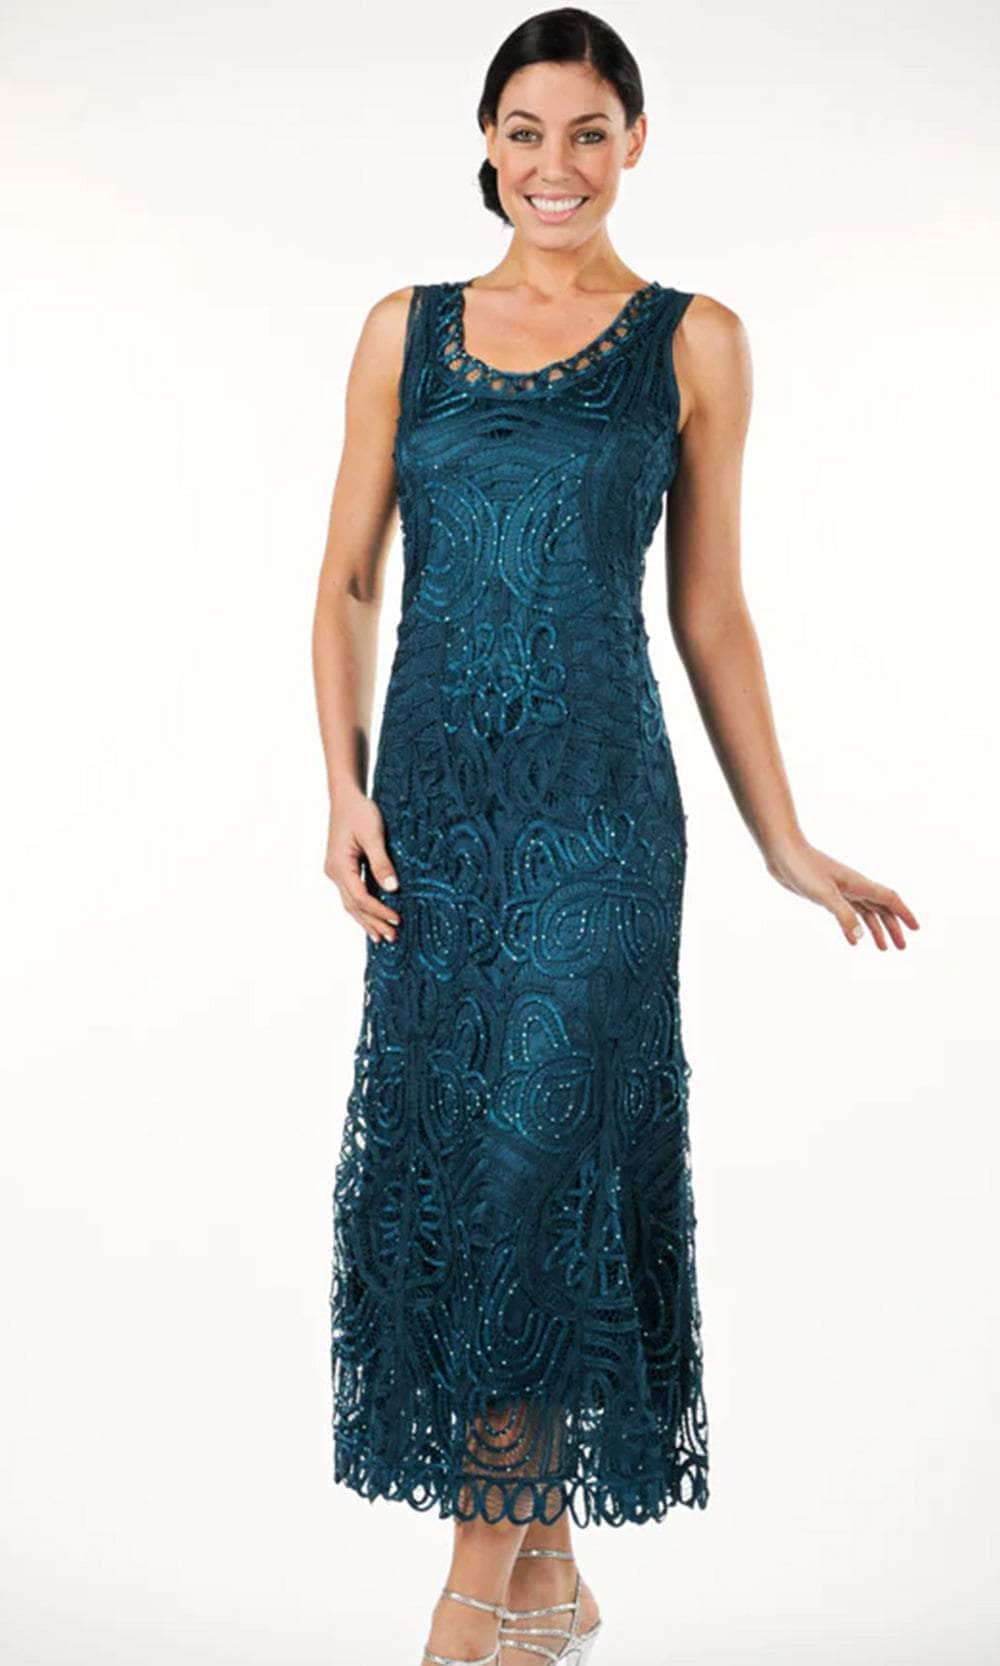 Soulmates D7052 - Classic Hand-Crocheted Lace Evening Dress Mother of the Bride Dresses